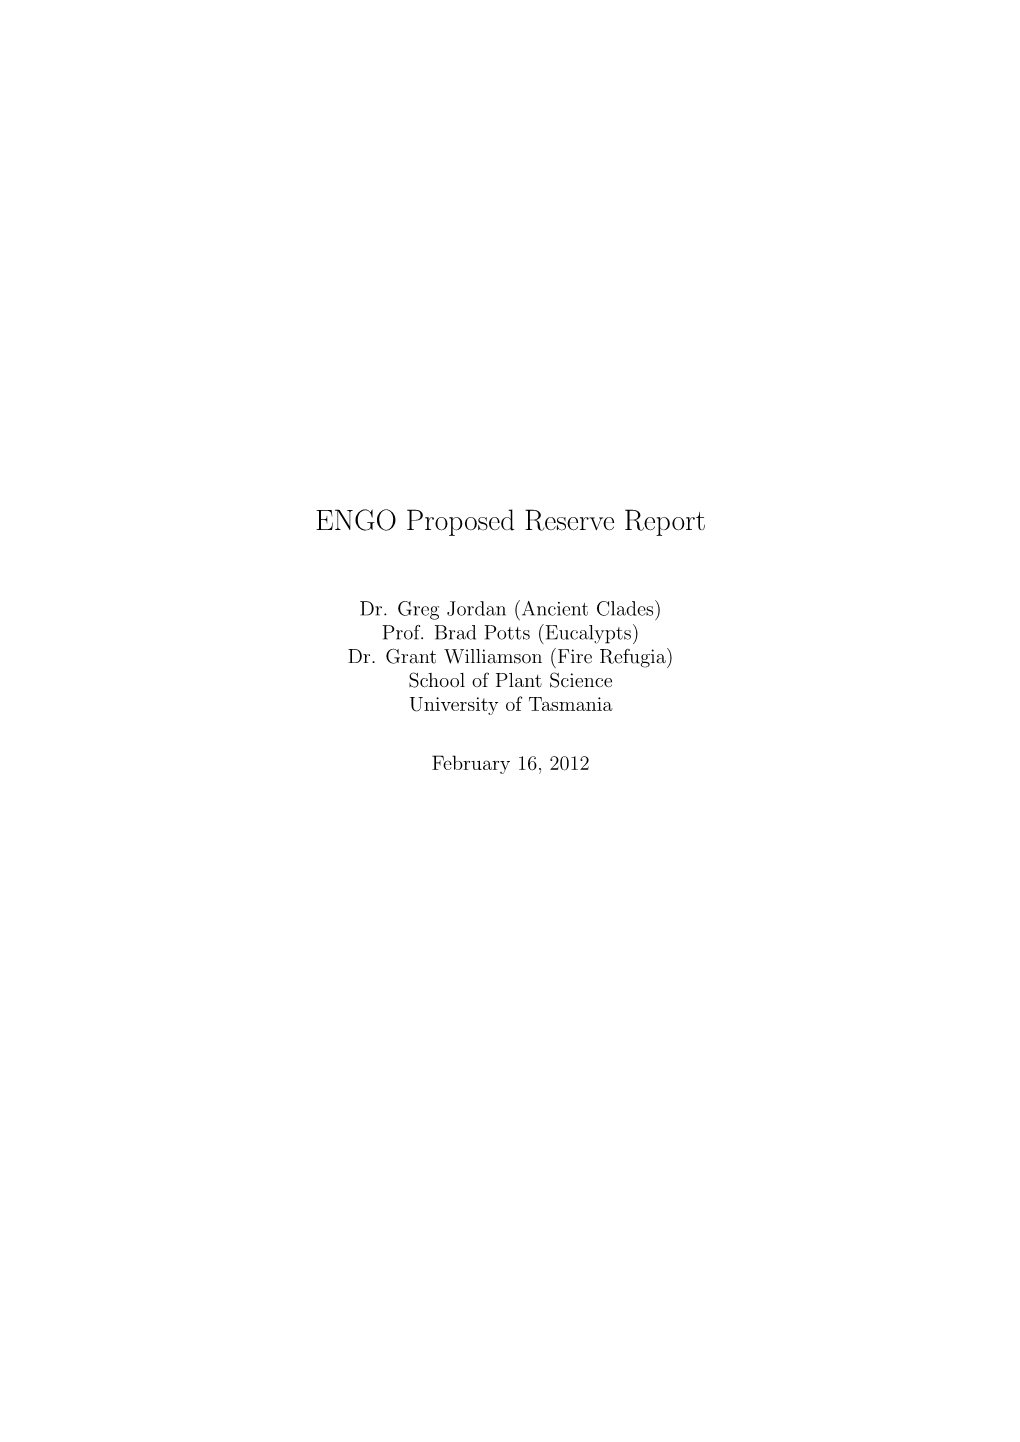 ENGO Proposed Reserve Report